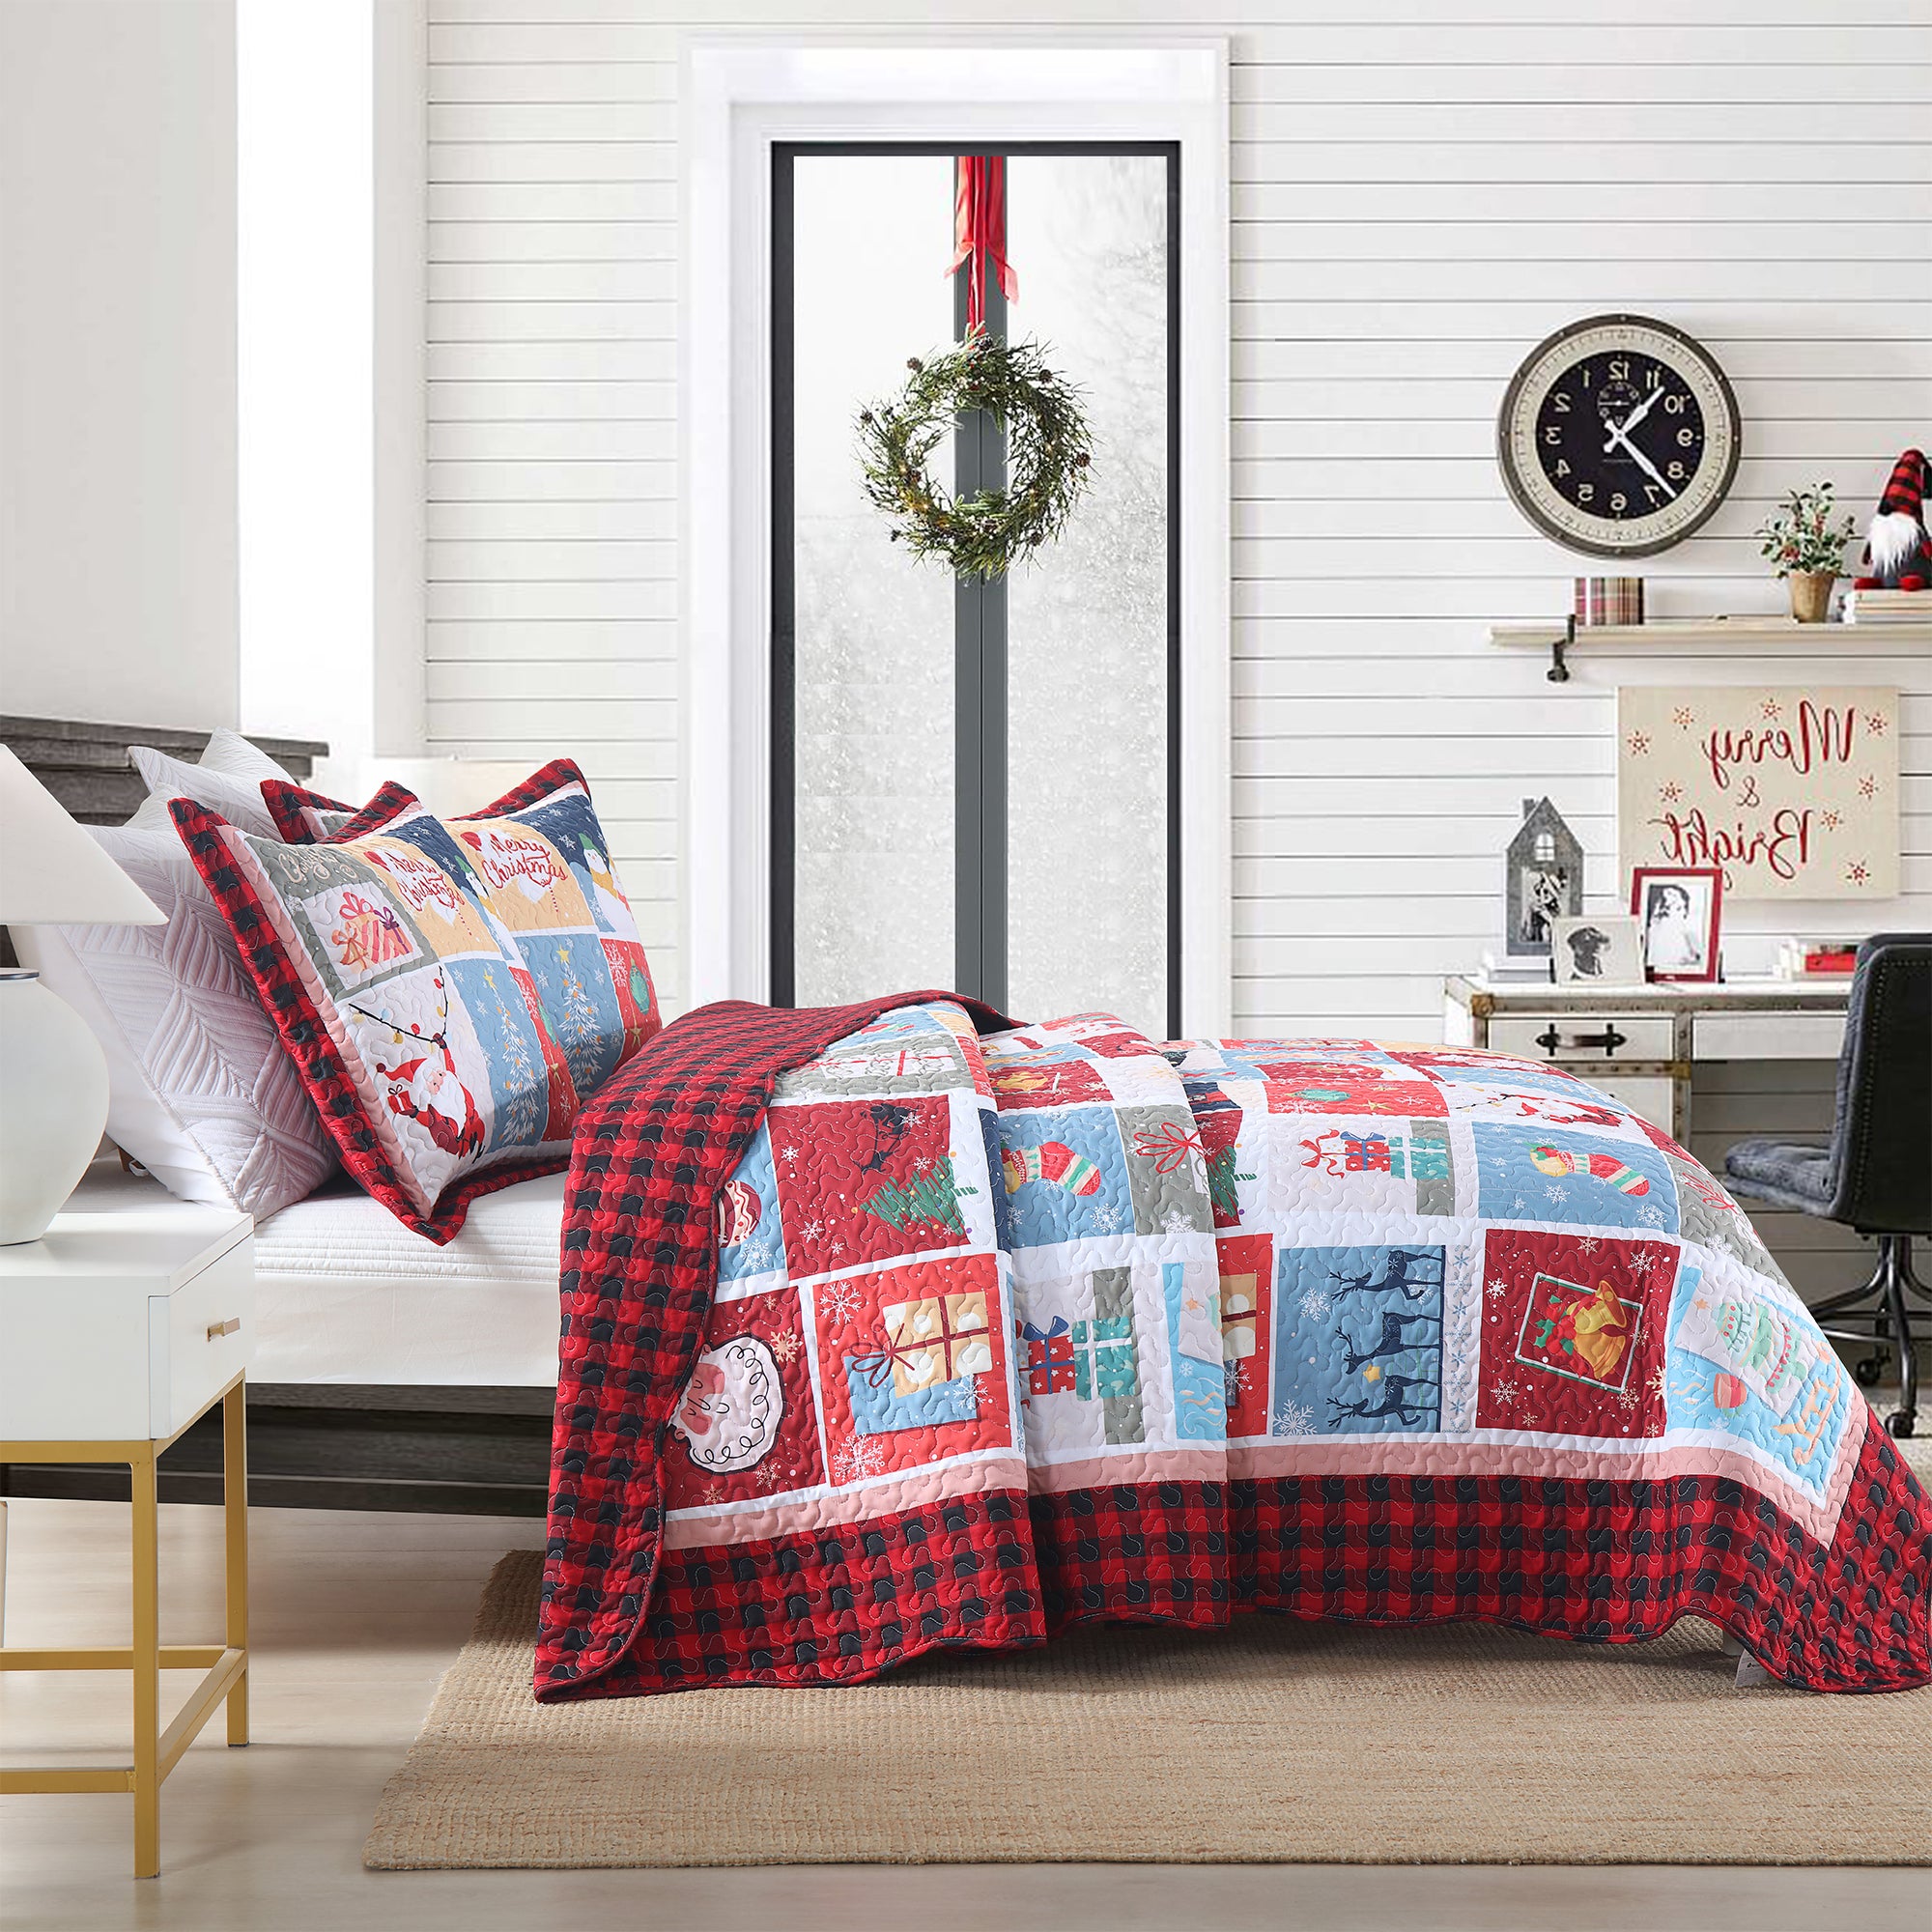 3 Pcs Festive Christmas Quilt Bedspread Set Holiday Bedding for Your Bedroom C104